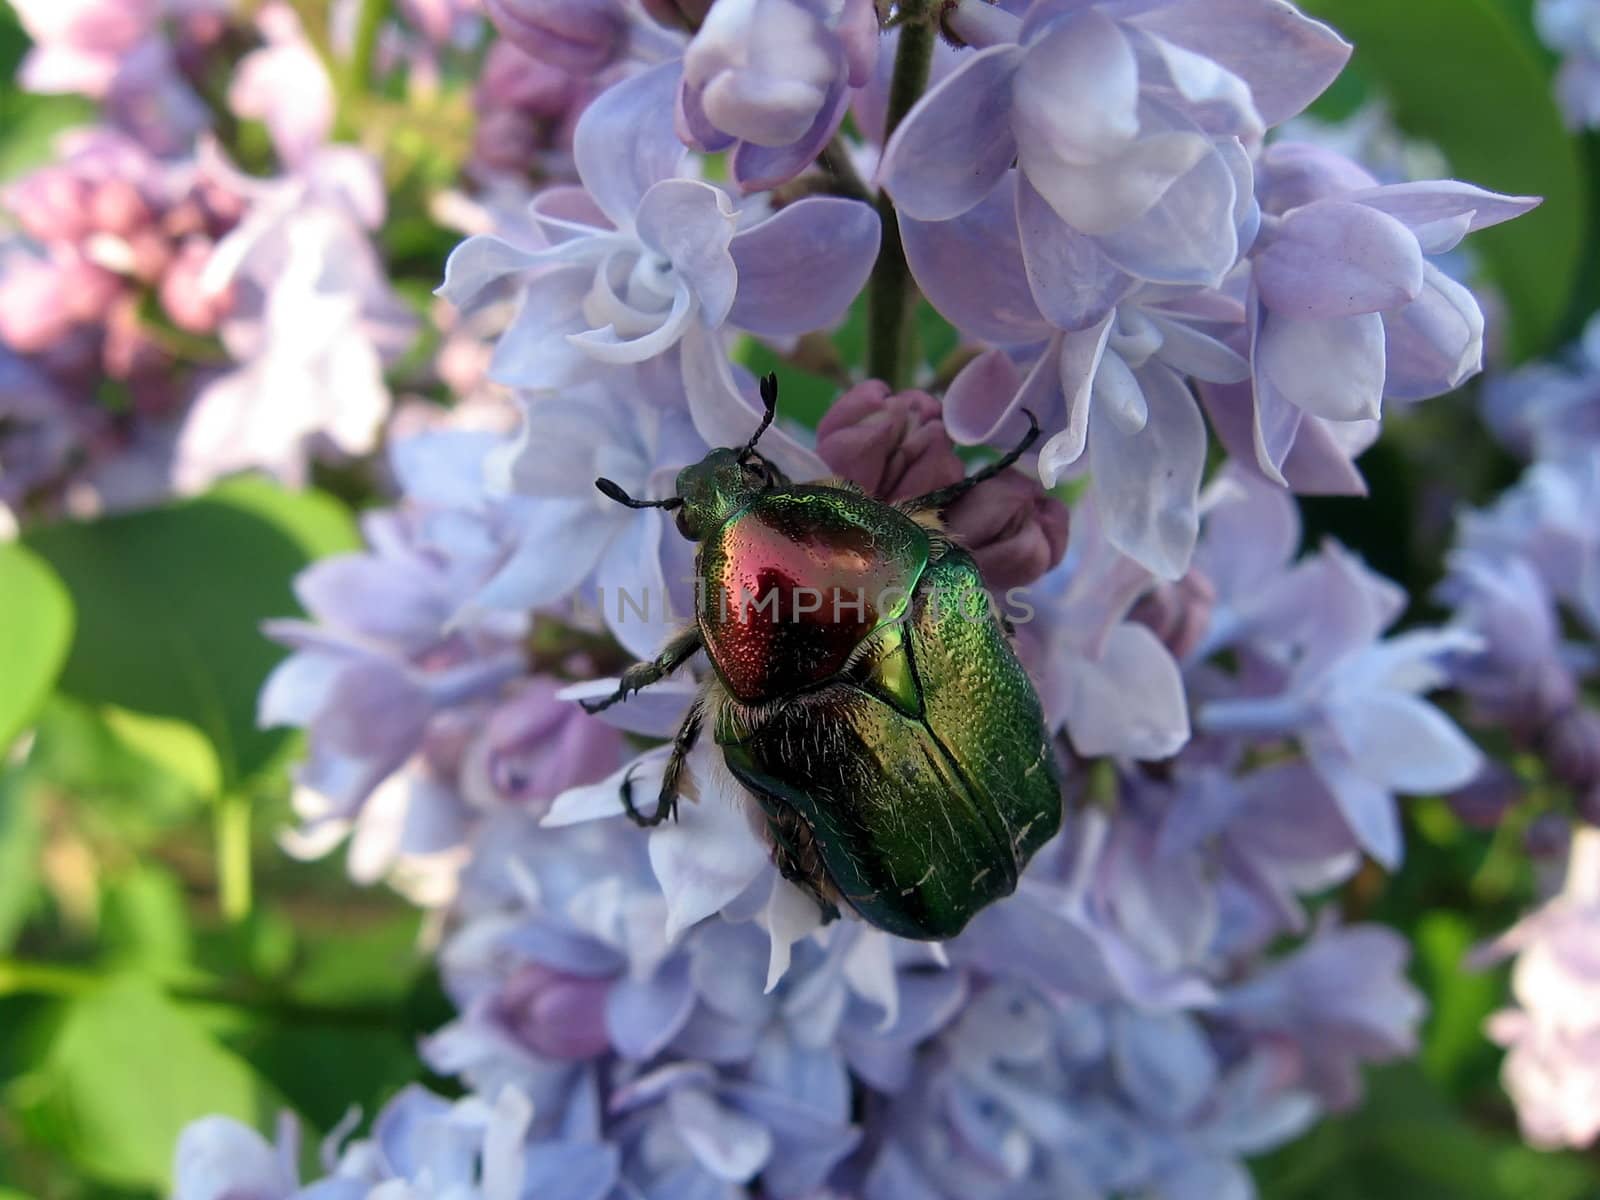 Very beautiful copper large beetle sits on the lilac flowers